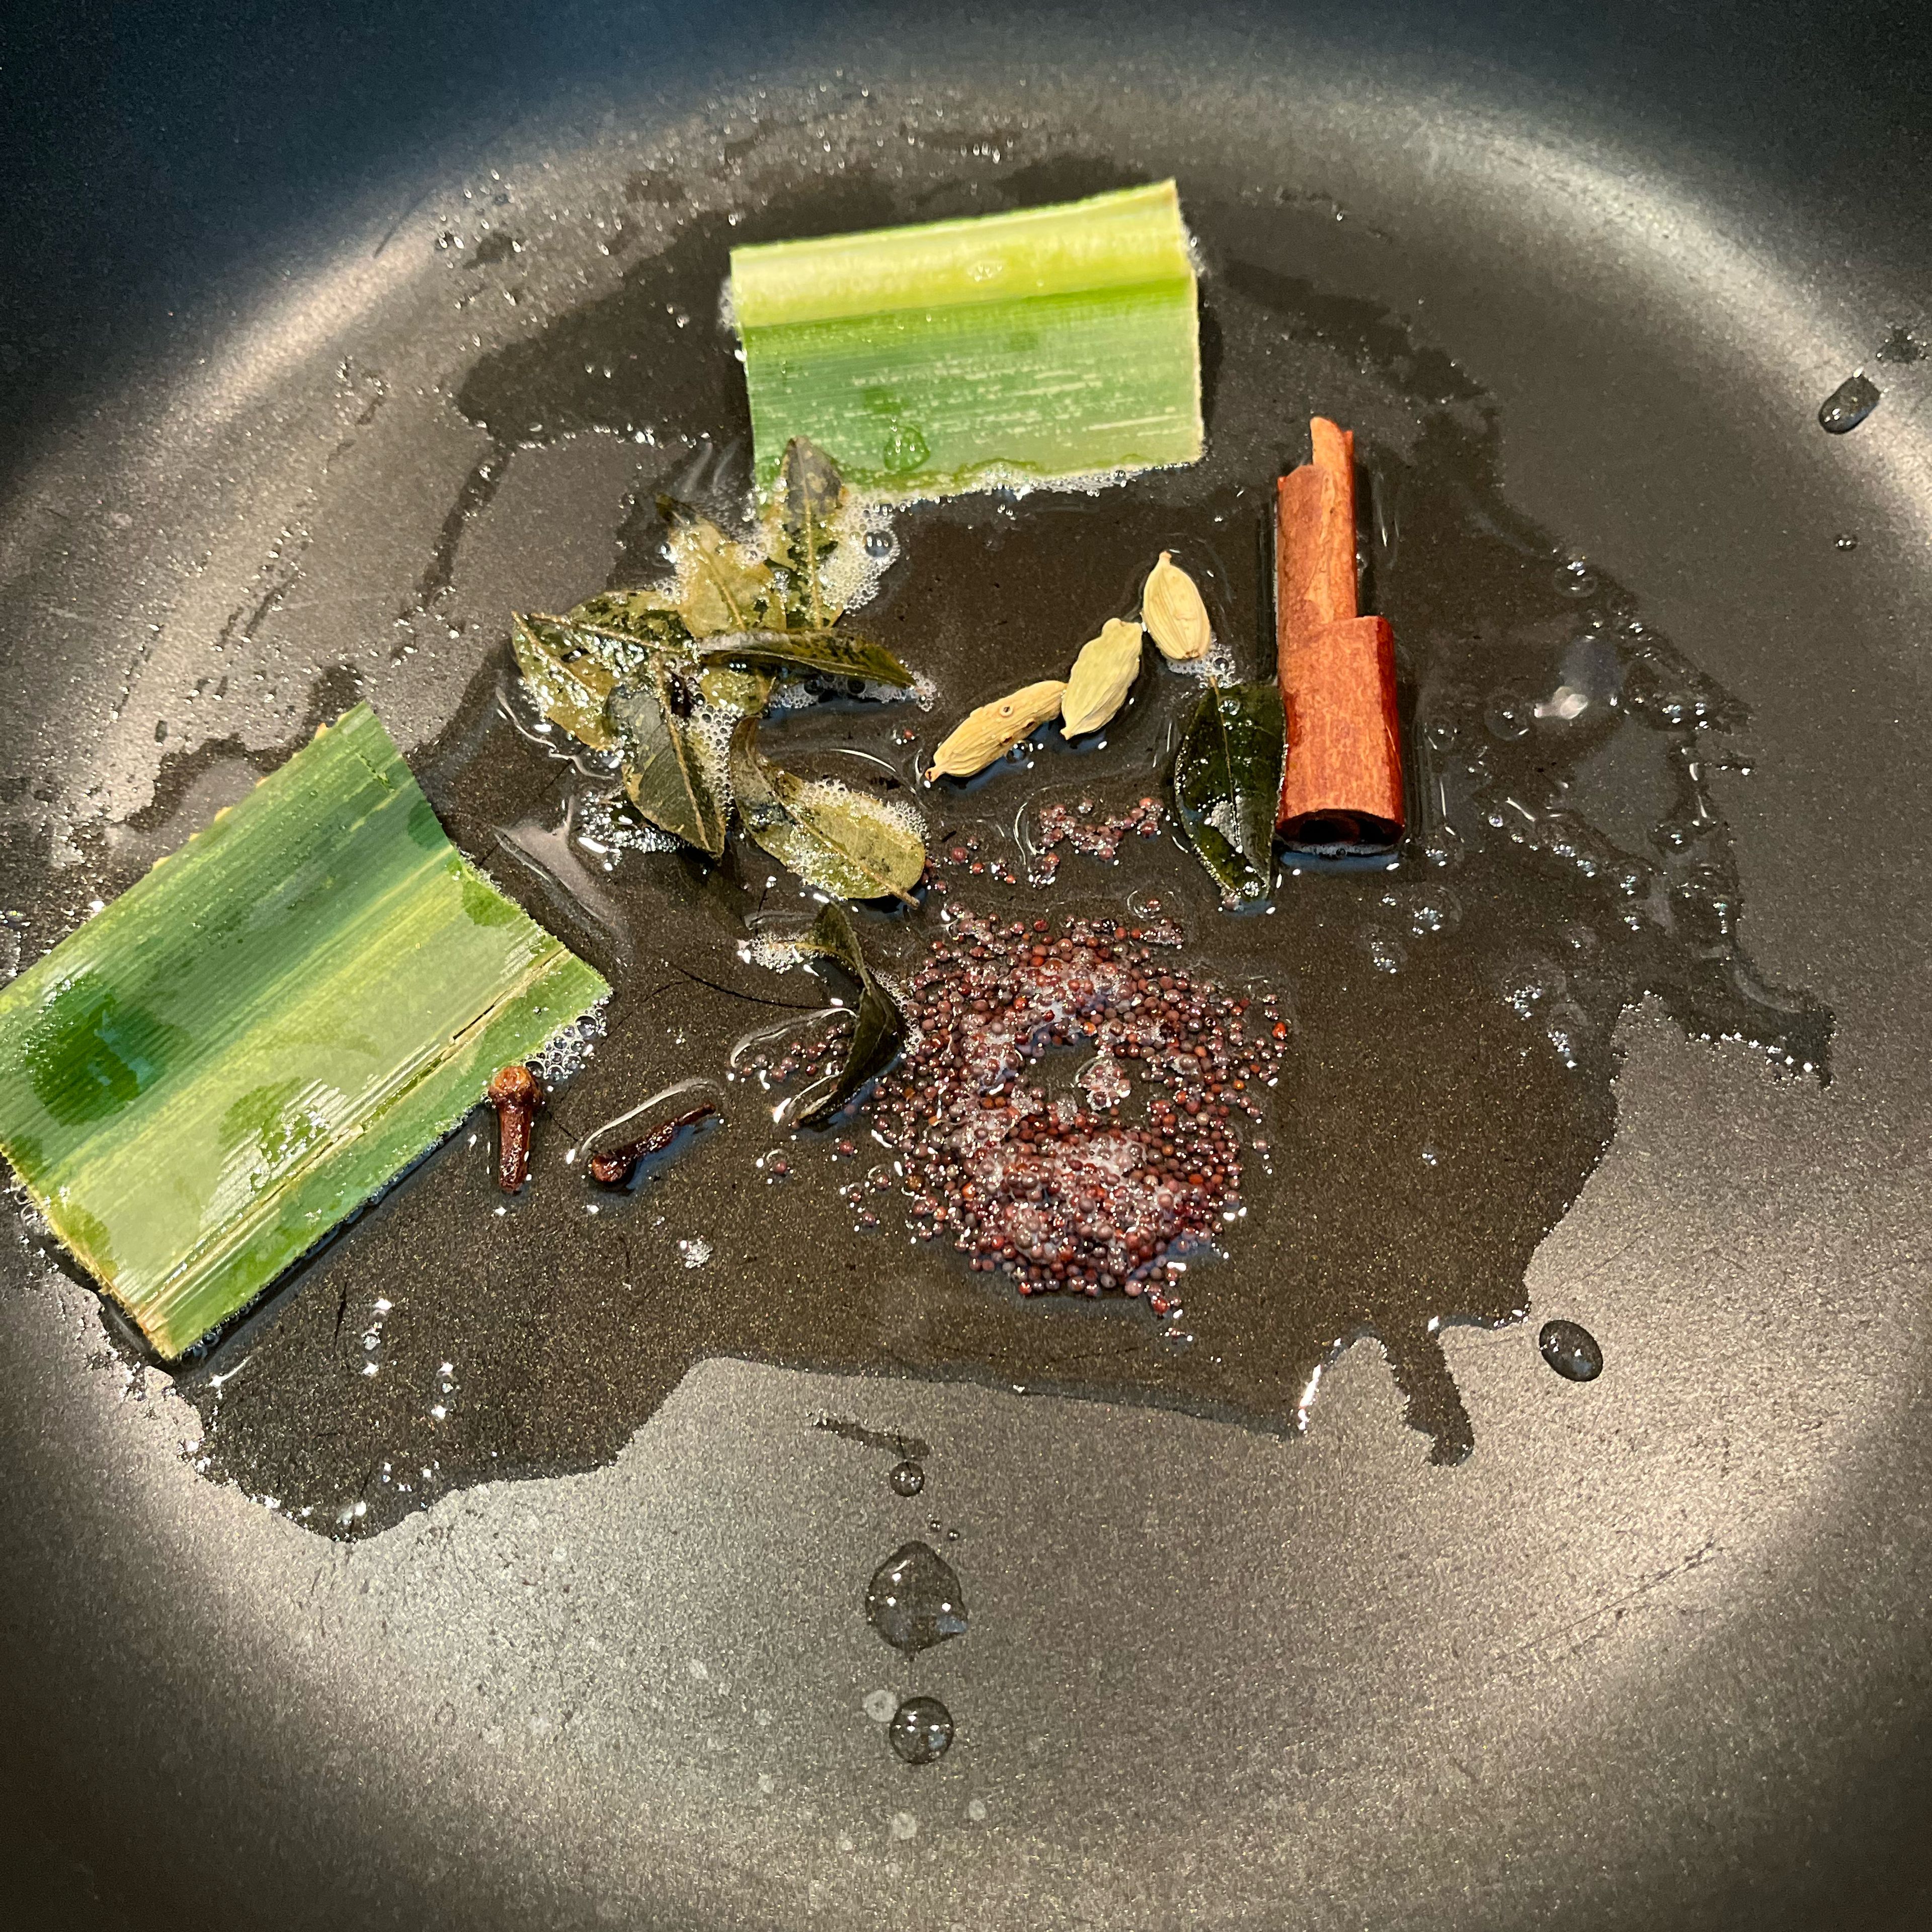 Heat oil in a nonstick pan. Add mustard seeds, cinnamon, cardamom, cloves, pandan and curry leaves. Heat up until mustard seeds pop.